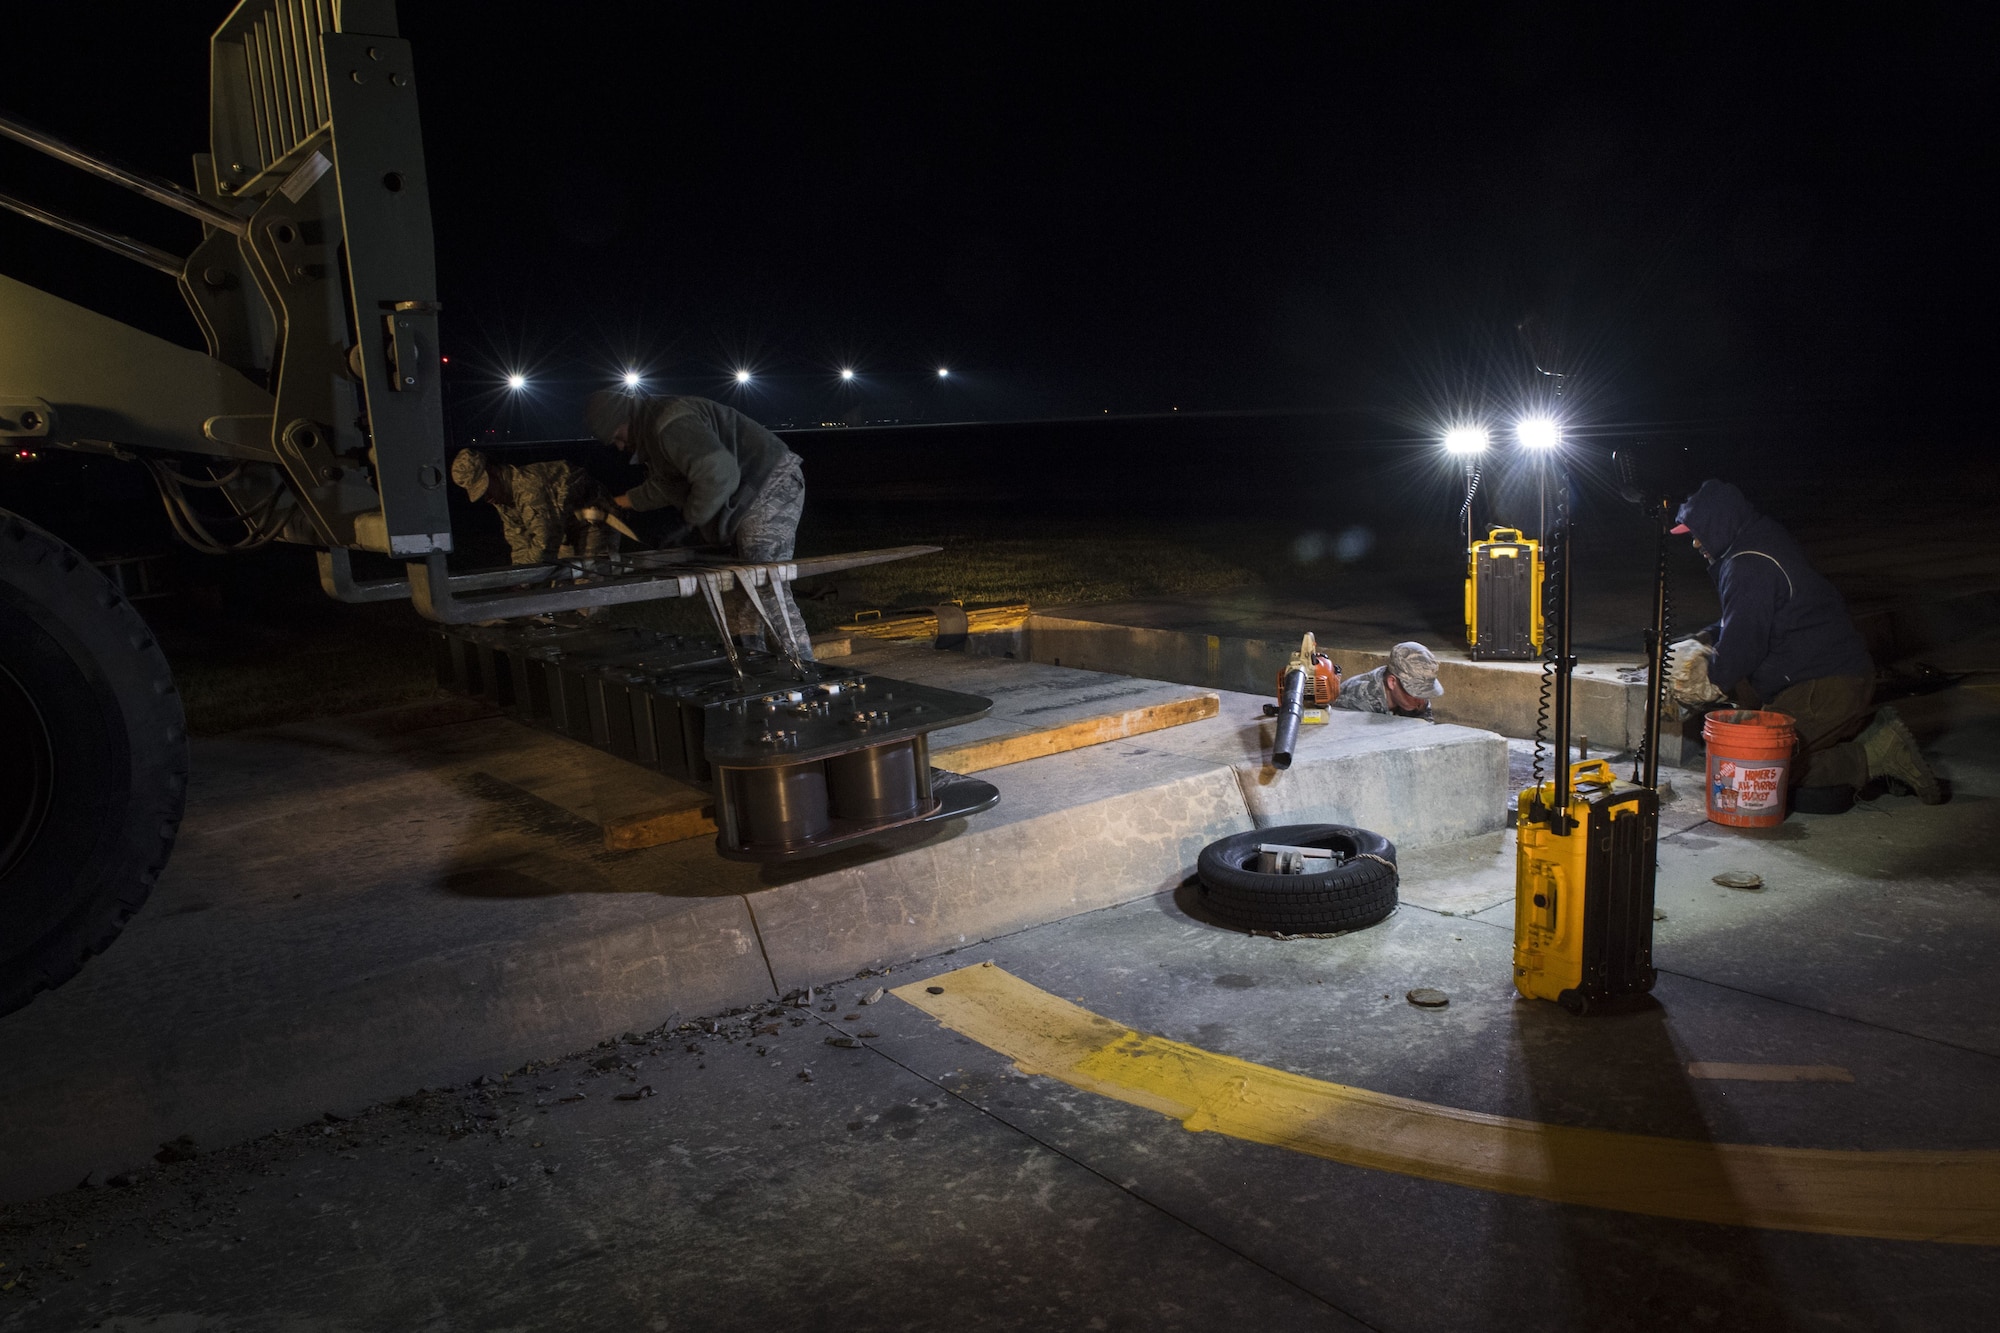 Airmen from 23d Civil Engineer Squadron power production shop, work on various tasks while replacing a fairlead beam, Nov. 15, 2017, at Moody Air Force Base, Ga. The beam is a part of a BAK-12 arresting system that is used on the runway to slow down fighter aircraft in emergency situations. (U.S. Air Force photo by Senior Airman Janiqua P. Robinson)